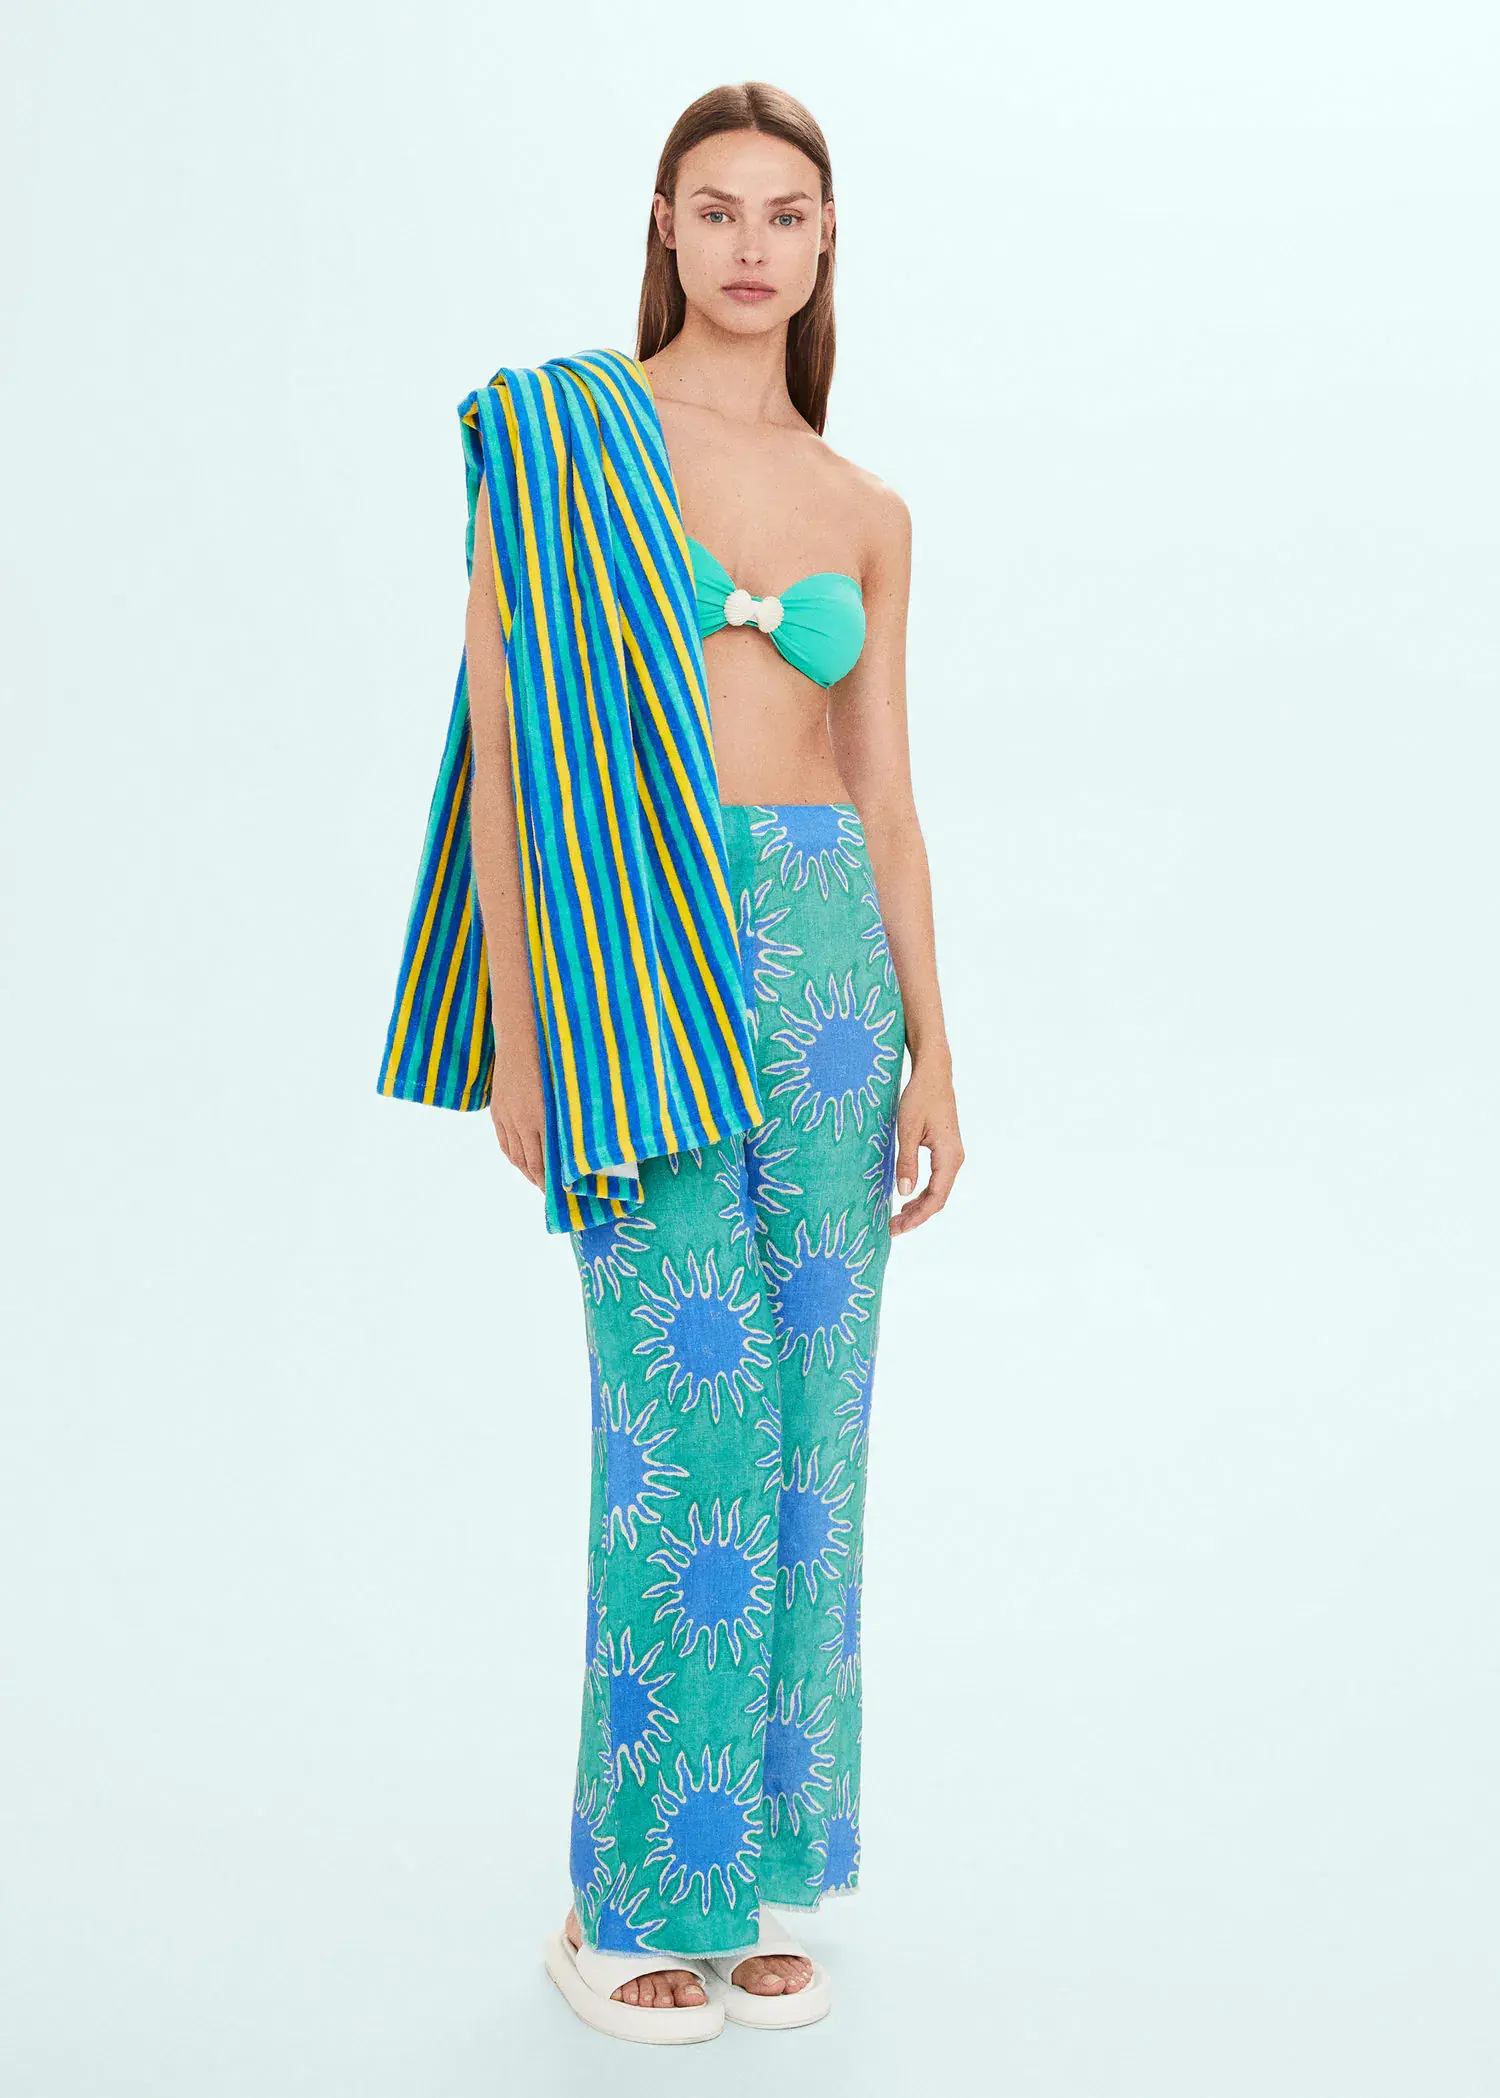 Mango Multi-colored striped beach towel. a woman standing in a blue and green outfit. 